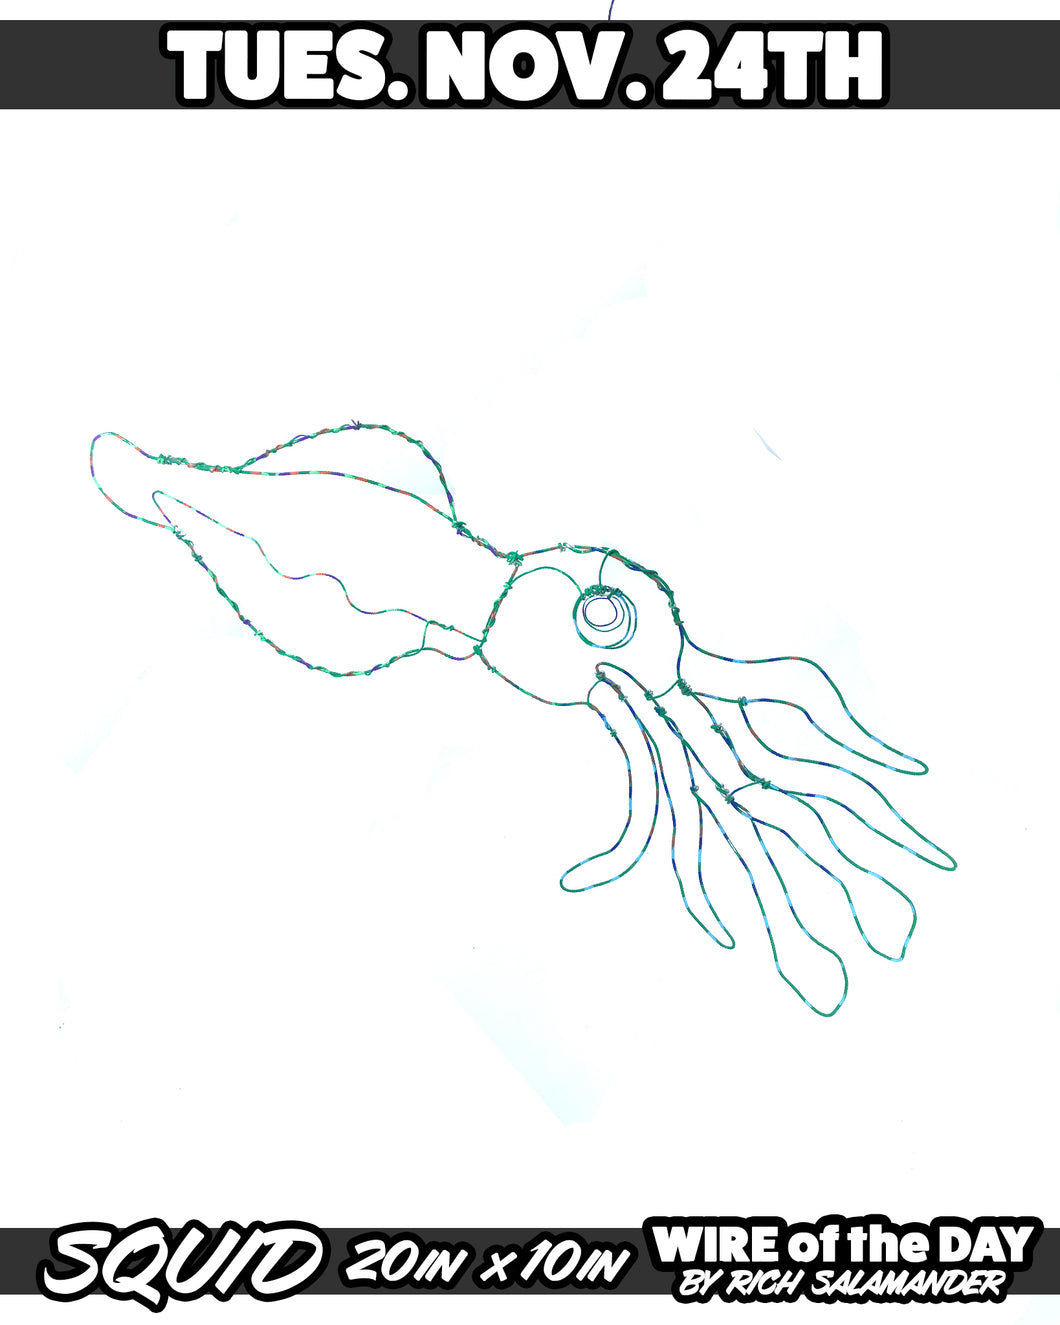 WIRE of the DAY SQUID